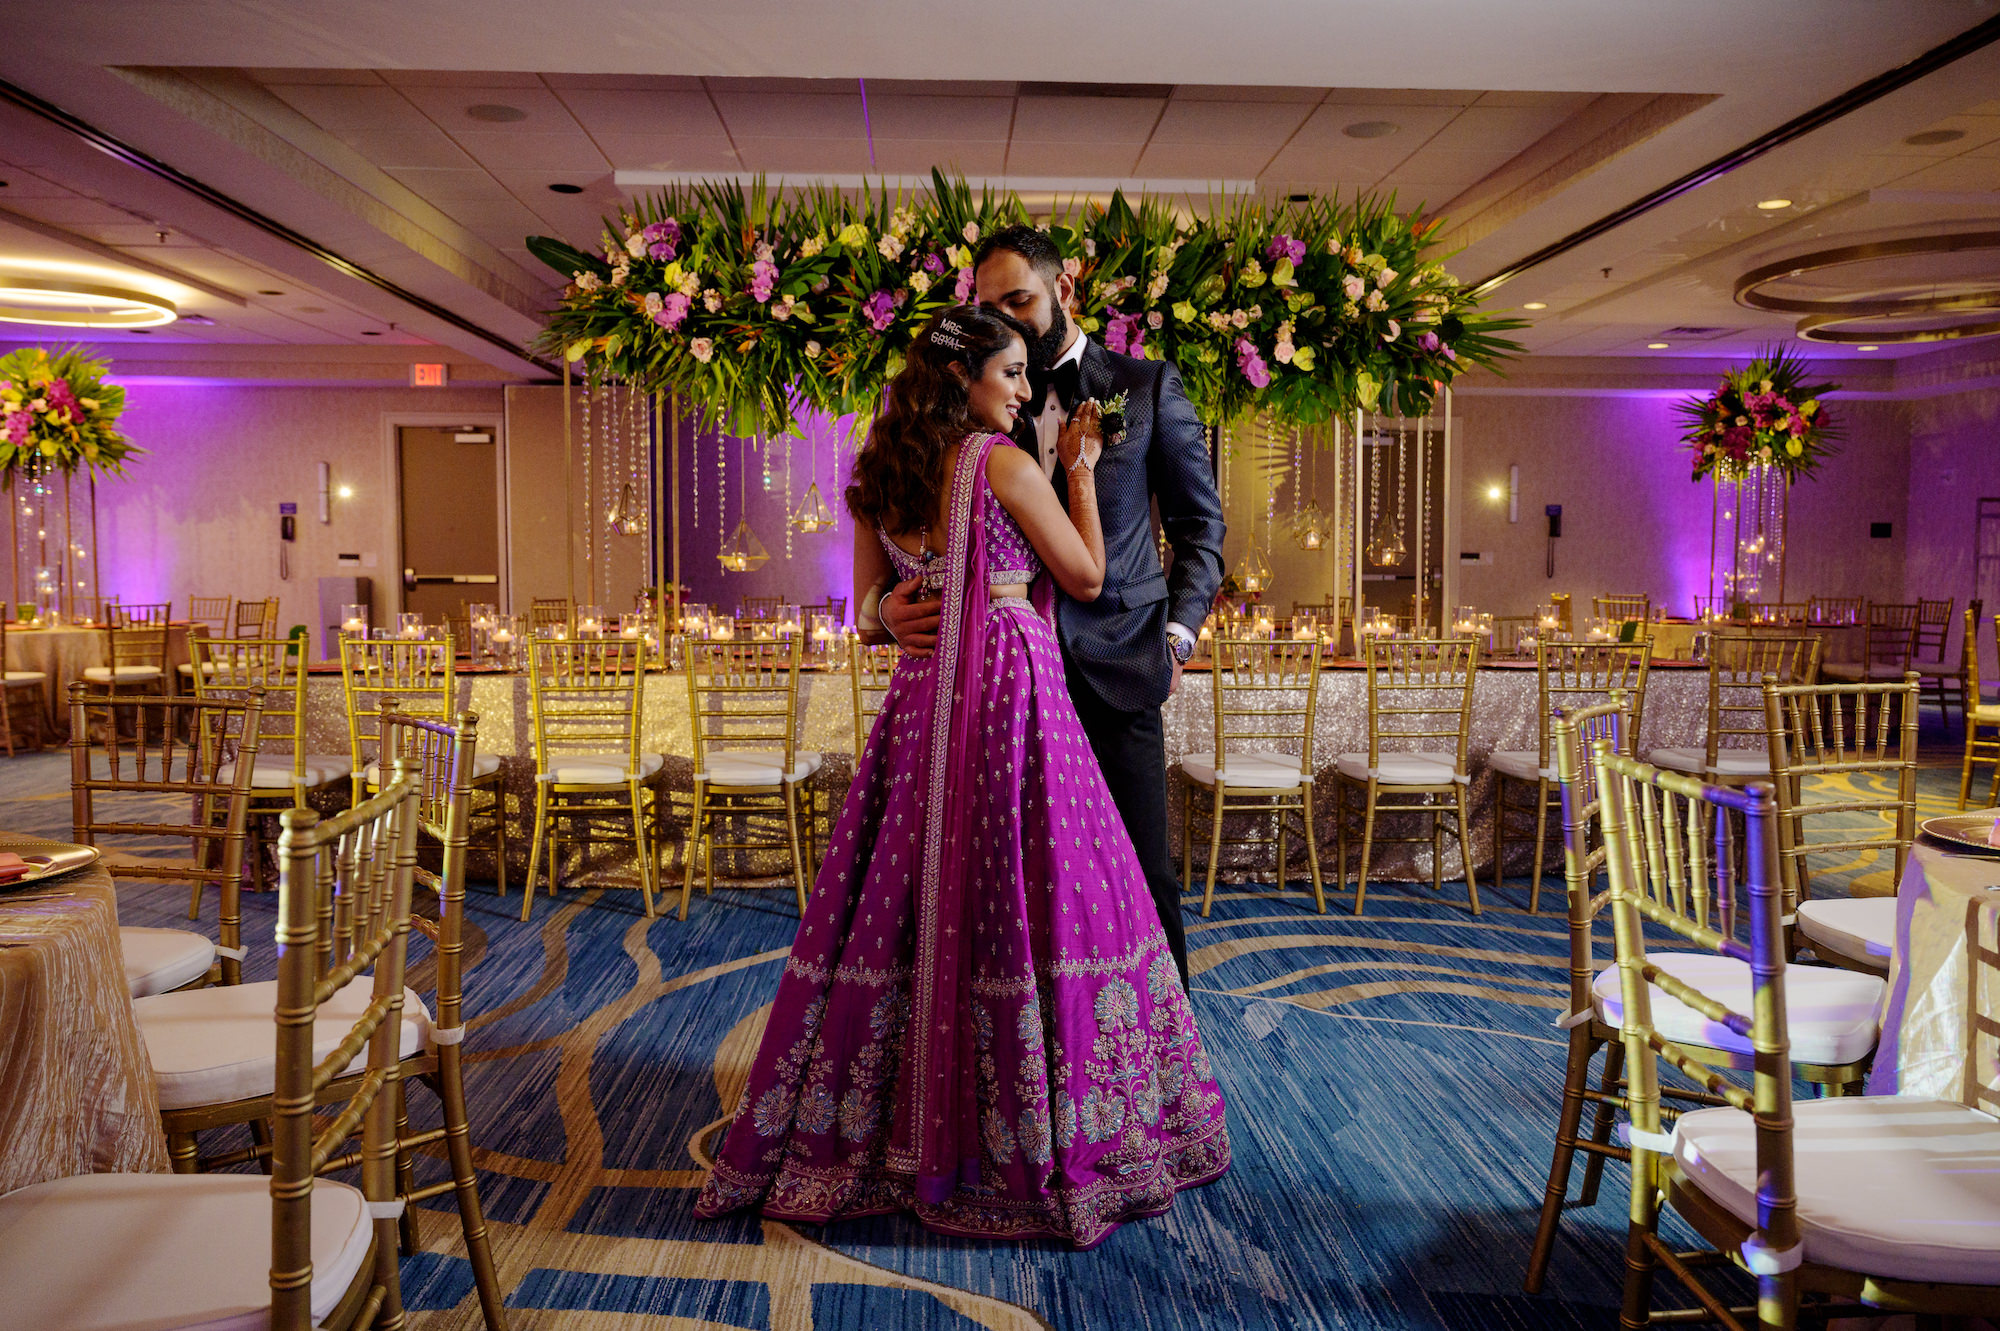 Indian Bride and Groom at Reception, Luxurious Decor with Head Feasting Table Adorned with Tall Floral Centerpieces, Tropical Flowers, Gold Chiavari Chairs, Bride Wearing Traditional Indian Fuchsia Lehenga and Groom Wearing Modern Black Tuxedo | Tampa Bay Hair and Makeup Artist Michelle Renee the Studio | Gabro Event Rentals | Hilton Clearwater Beach Resort and Spa